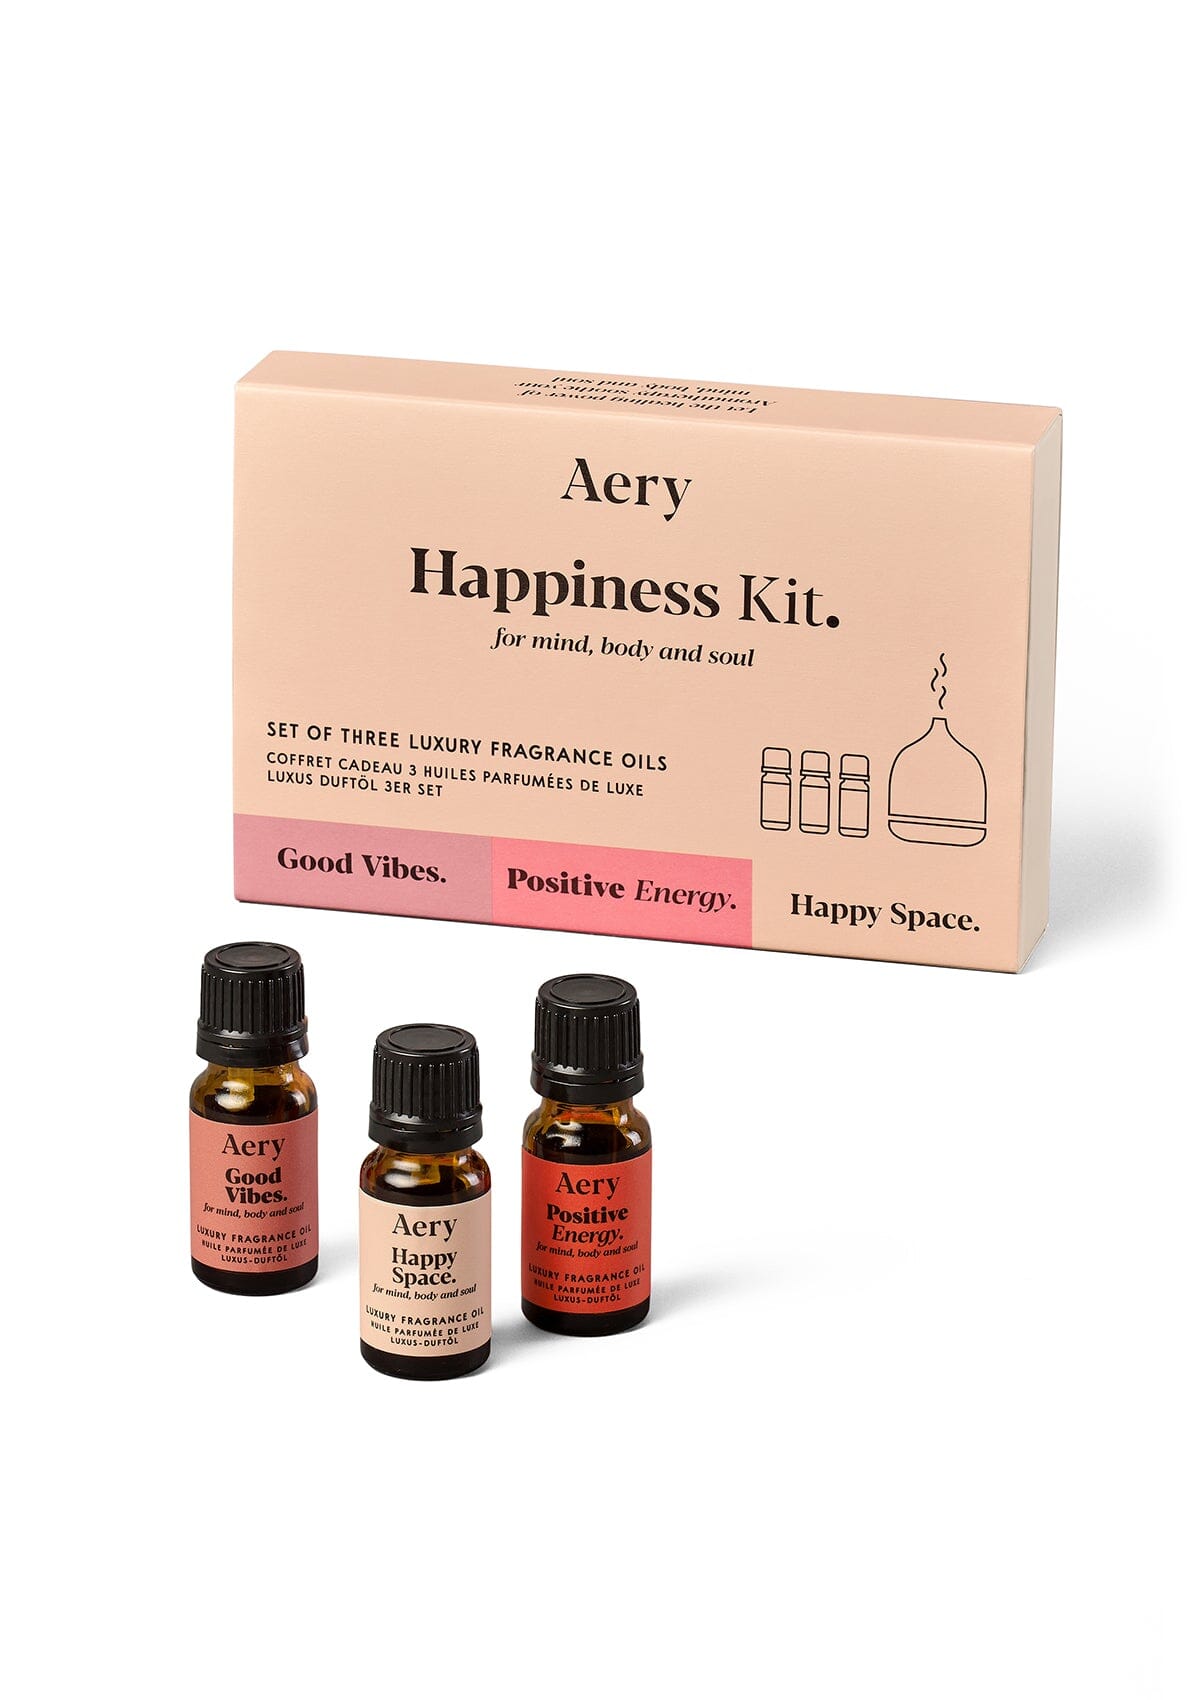 Pink Happiness Kit fragrance oil set of three displayed next to product packaging by Aery on white background 